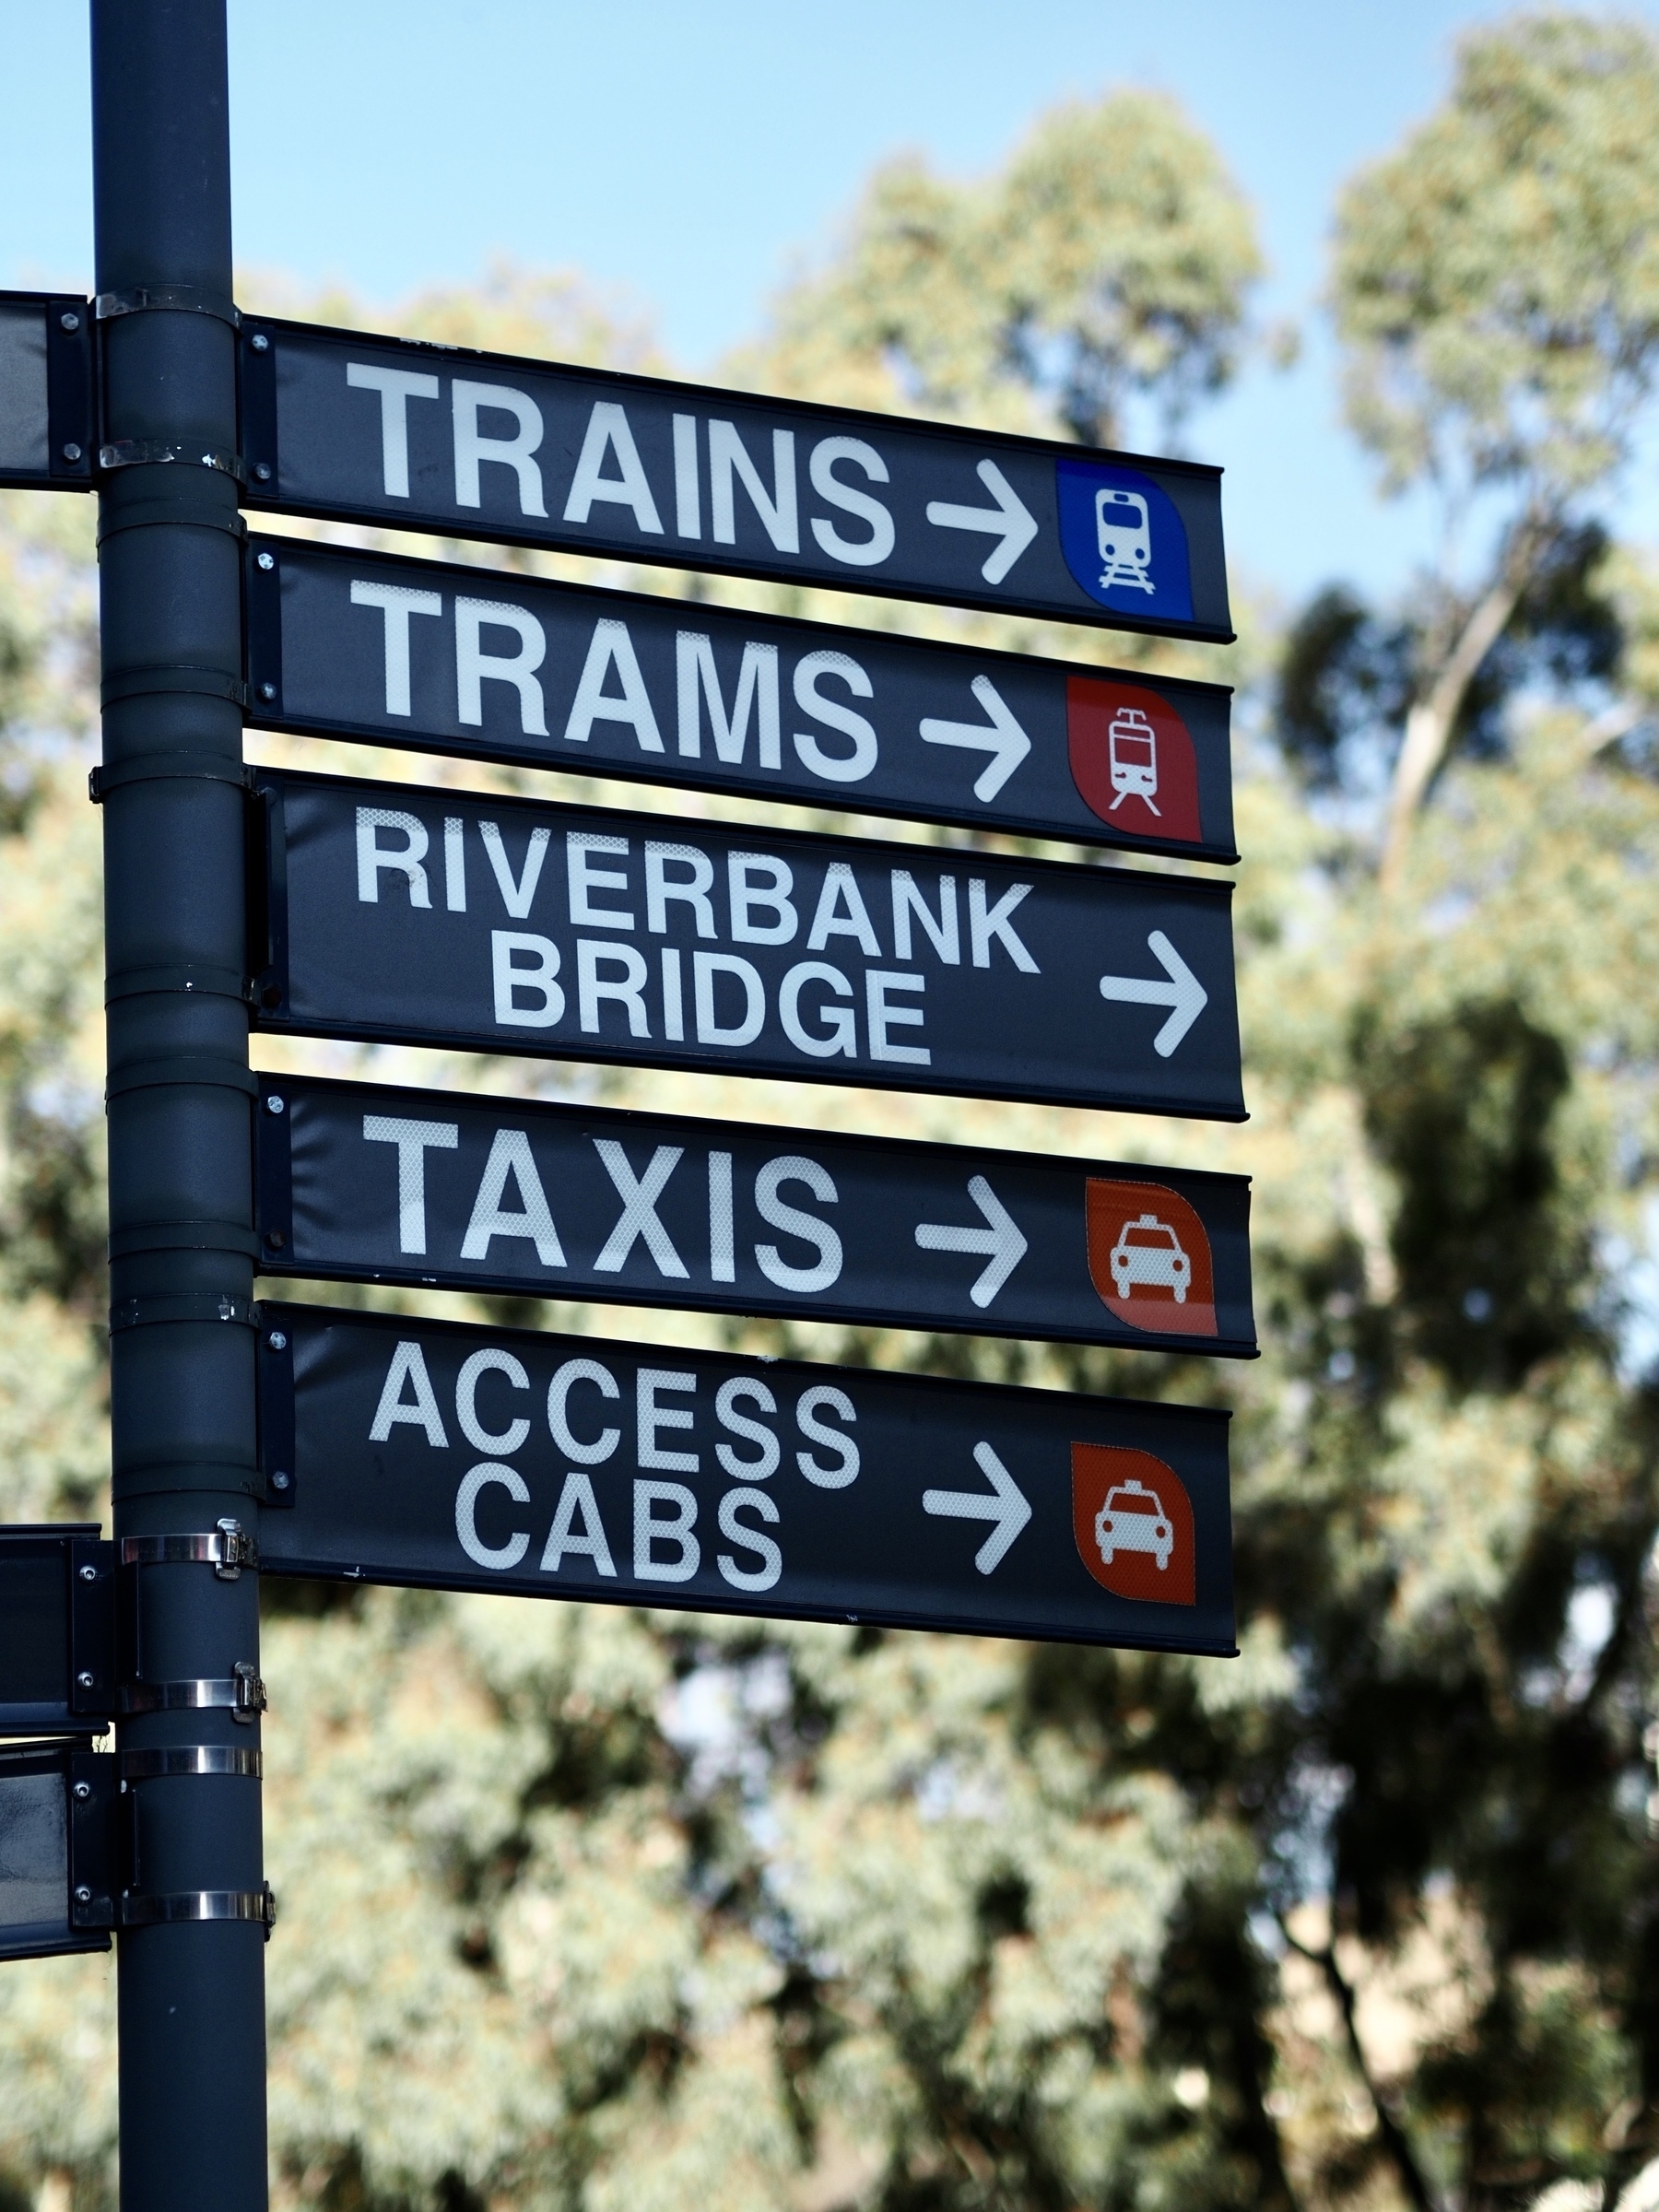 Transport signs for trains, trams, taxis and pedestrians that all point right